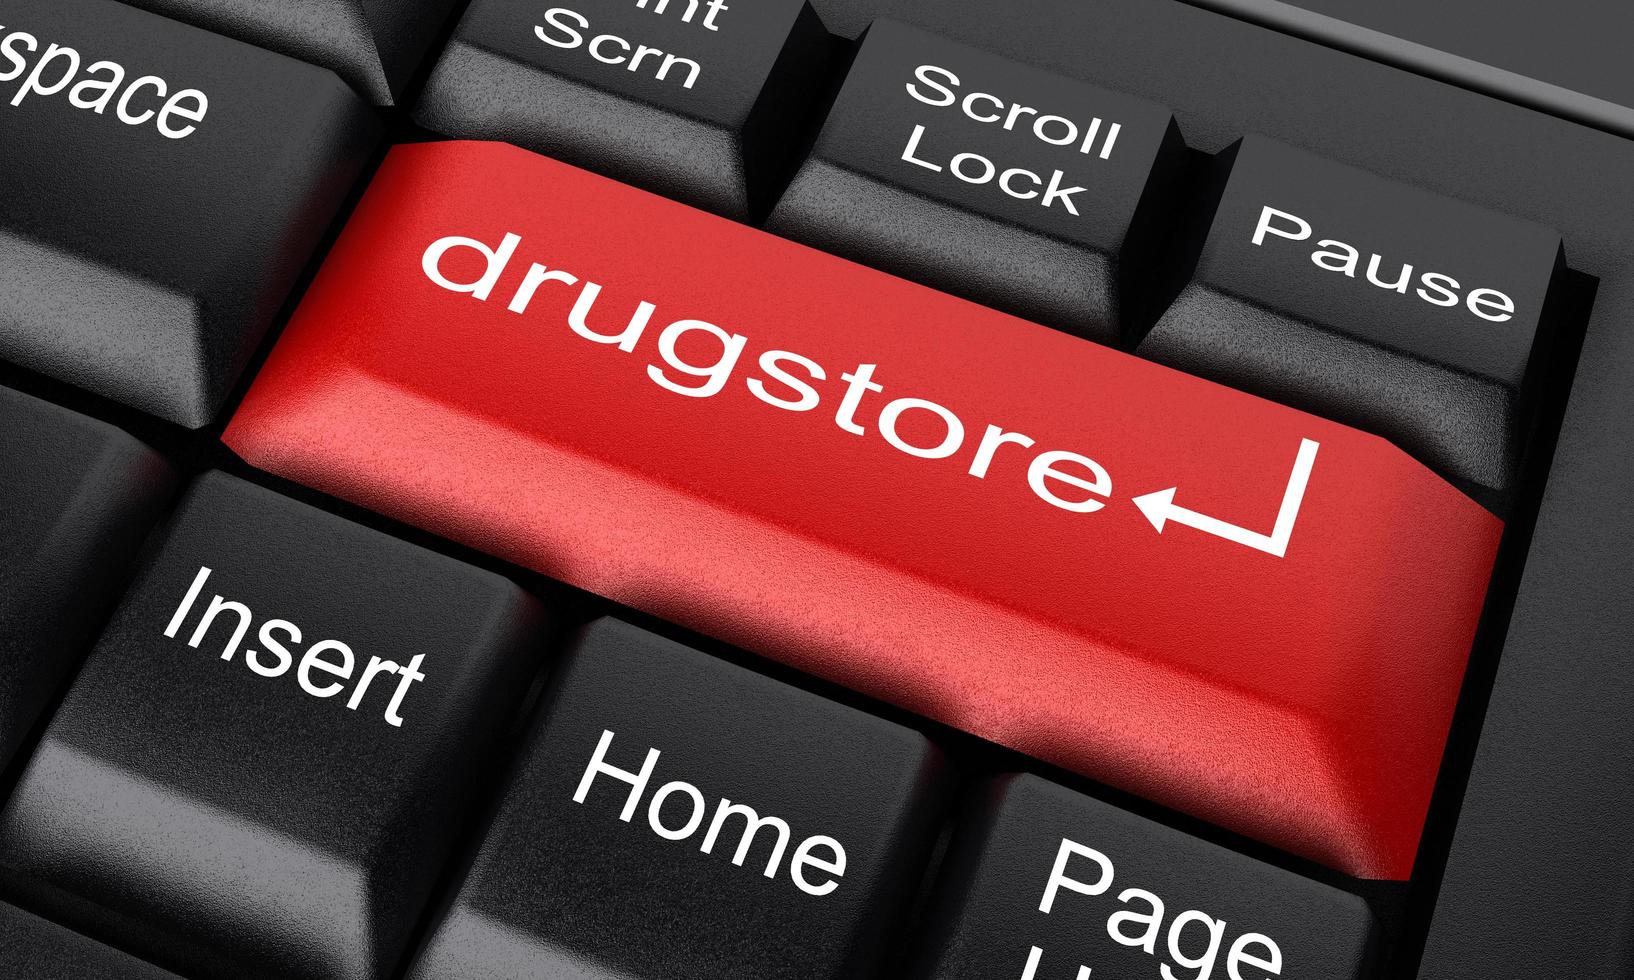 drugstore word on red keyboard button photo